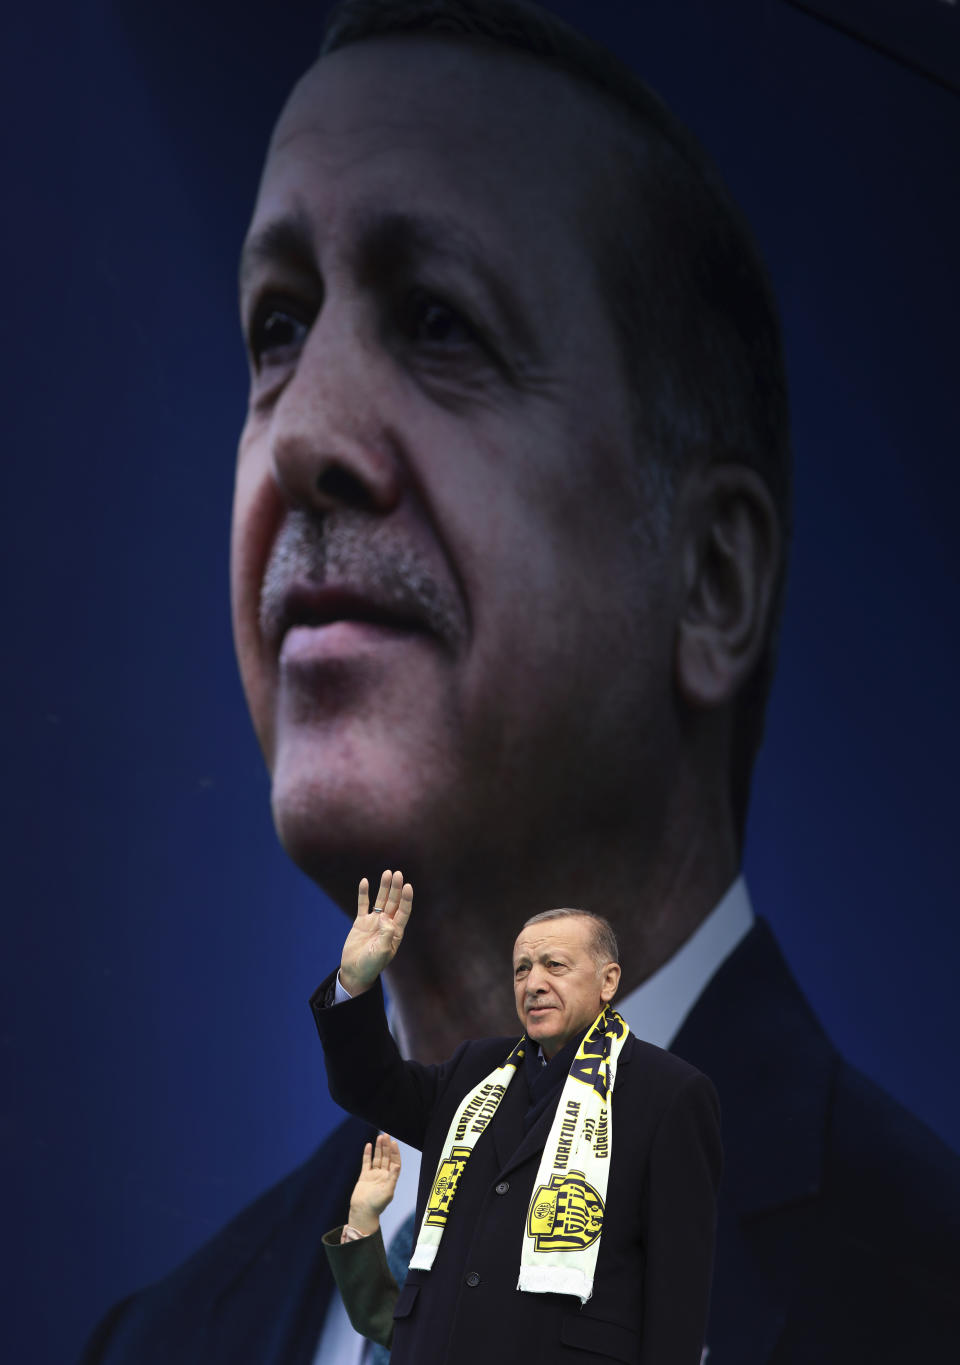 Turkish President and People's Alliance's presidential candidate Recep Tayyip Erdogan gestures to supporters during an election campaign rally in Ankara, Sunday, April 30, 2023. Turkey is heading toward presidential and parliamentary elections on Sunday May 14, 2023. (AP Photo/Ali Unal)